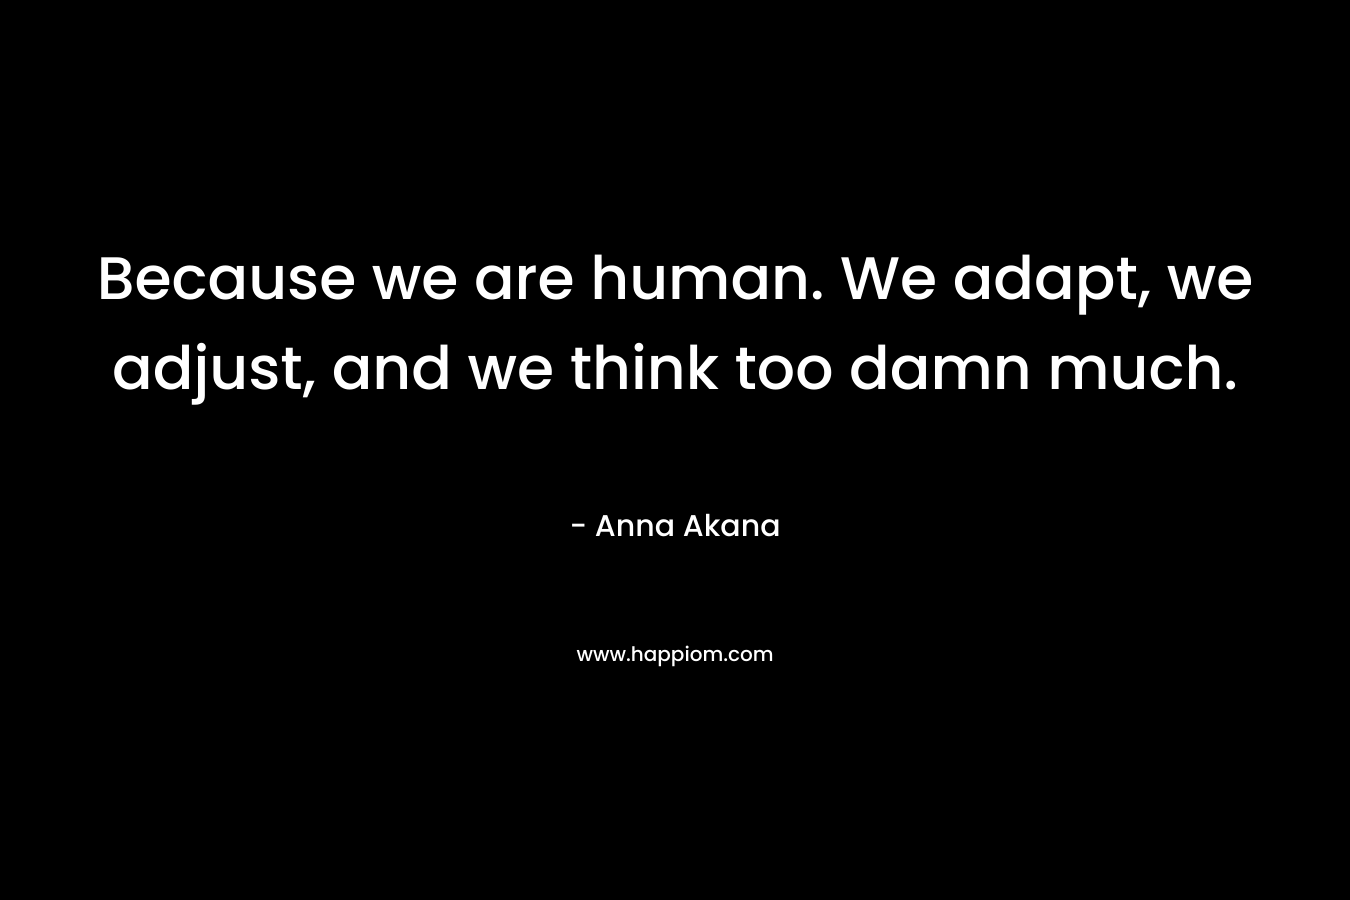 Because we are human. We adapt, we adjust, and we think too damn much.